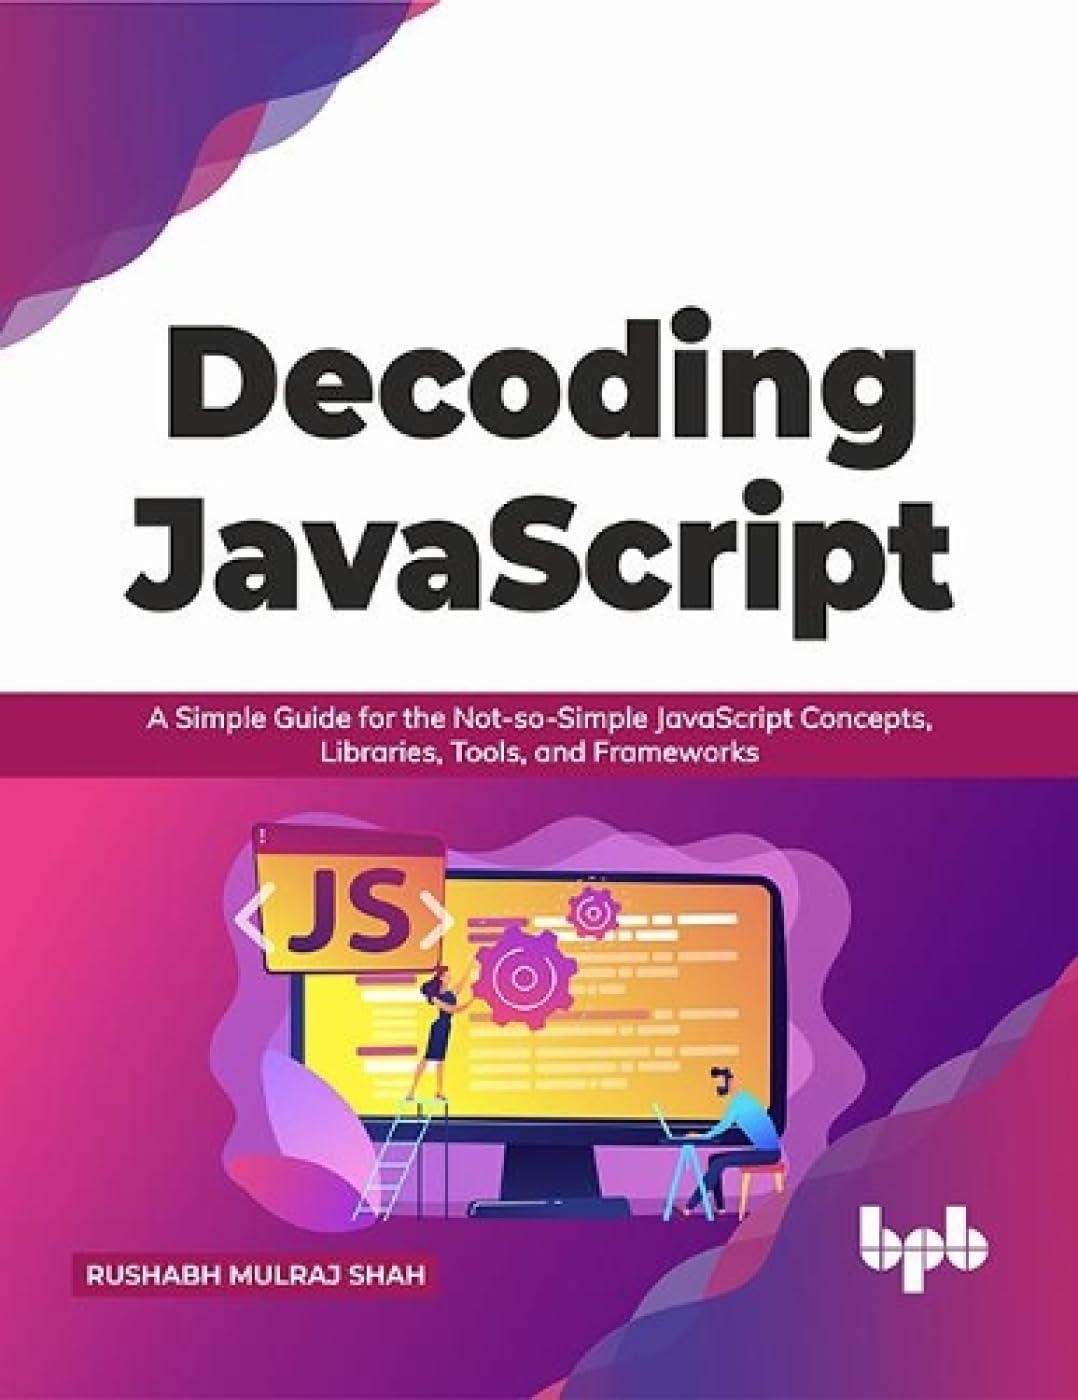 decoding javascript book decoding javascript book for coding